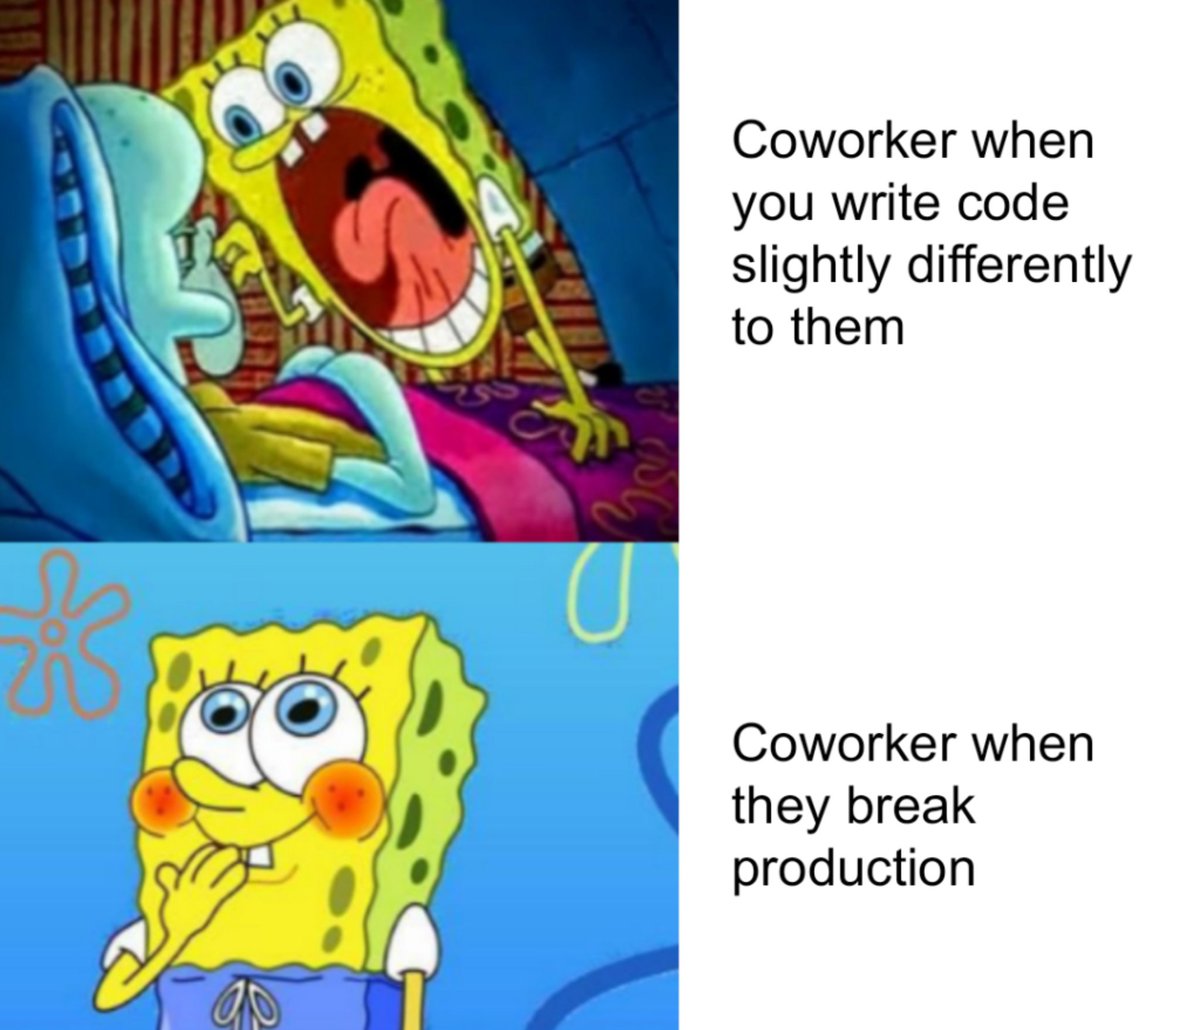 SpongeBob yelling and pointing at Squidward: Coworker when you write code s...